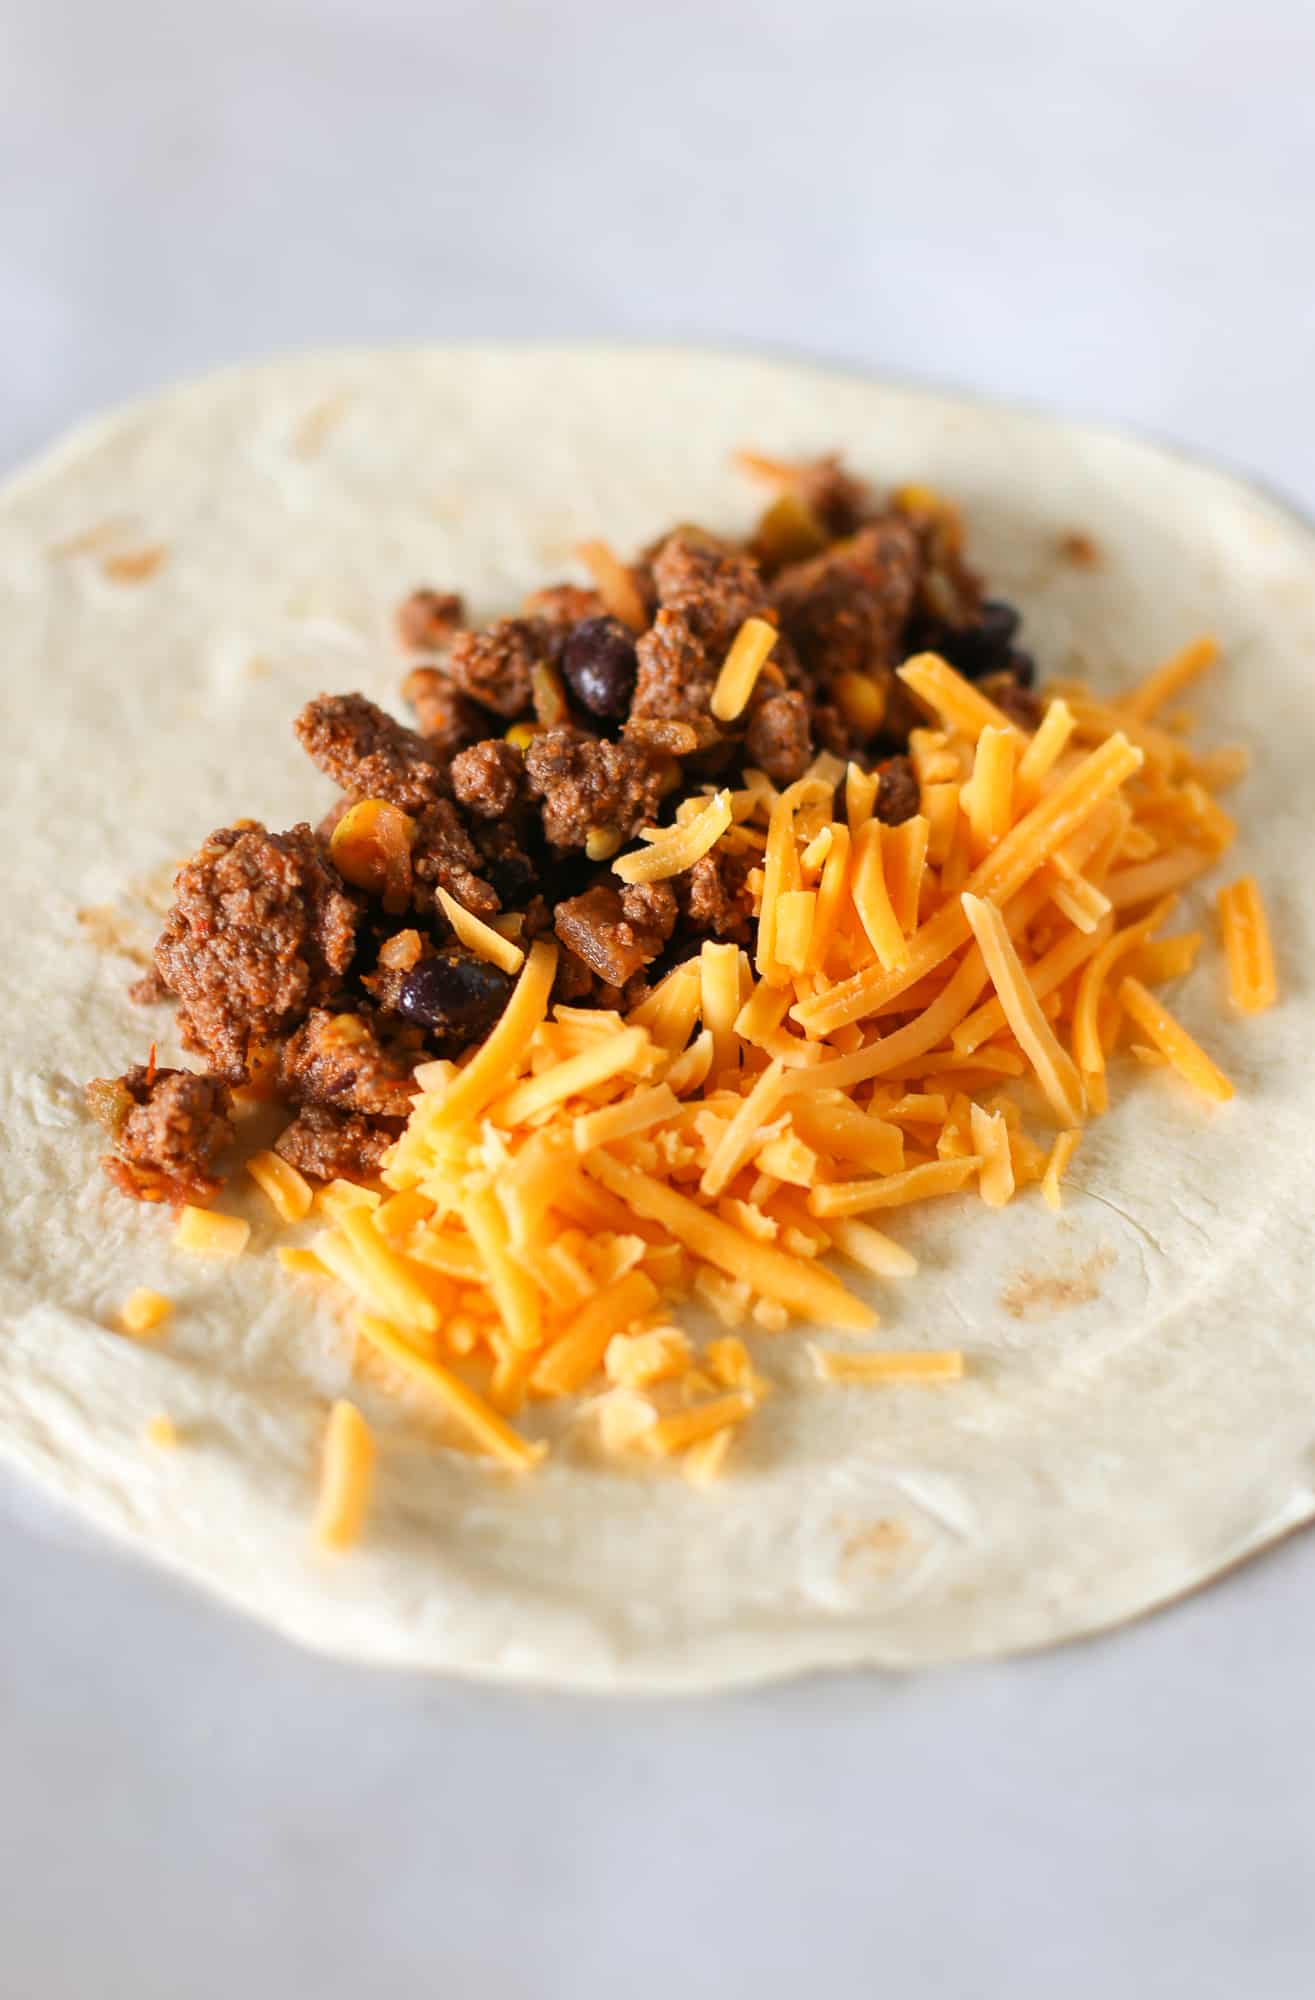 Assembling a burrito with ground beef and cheese.